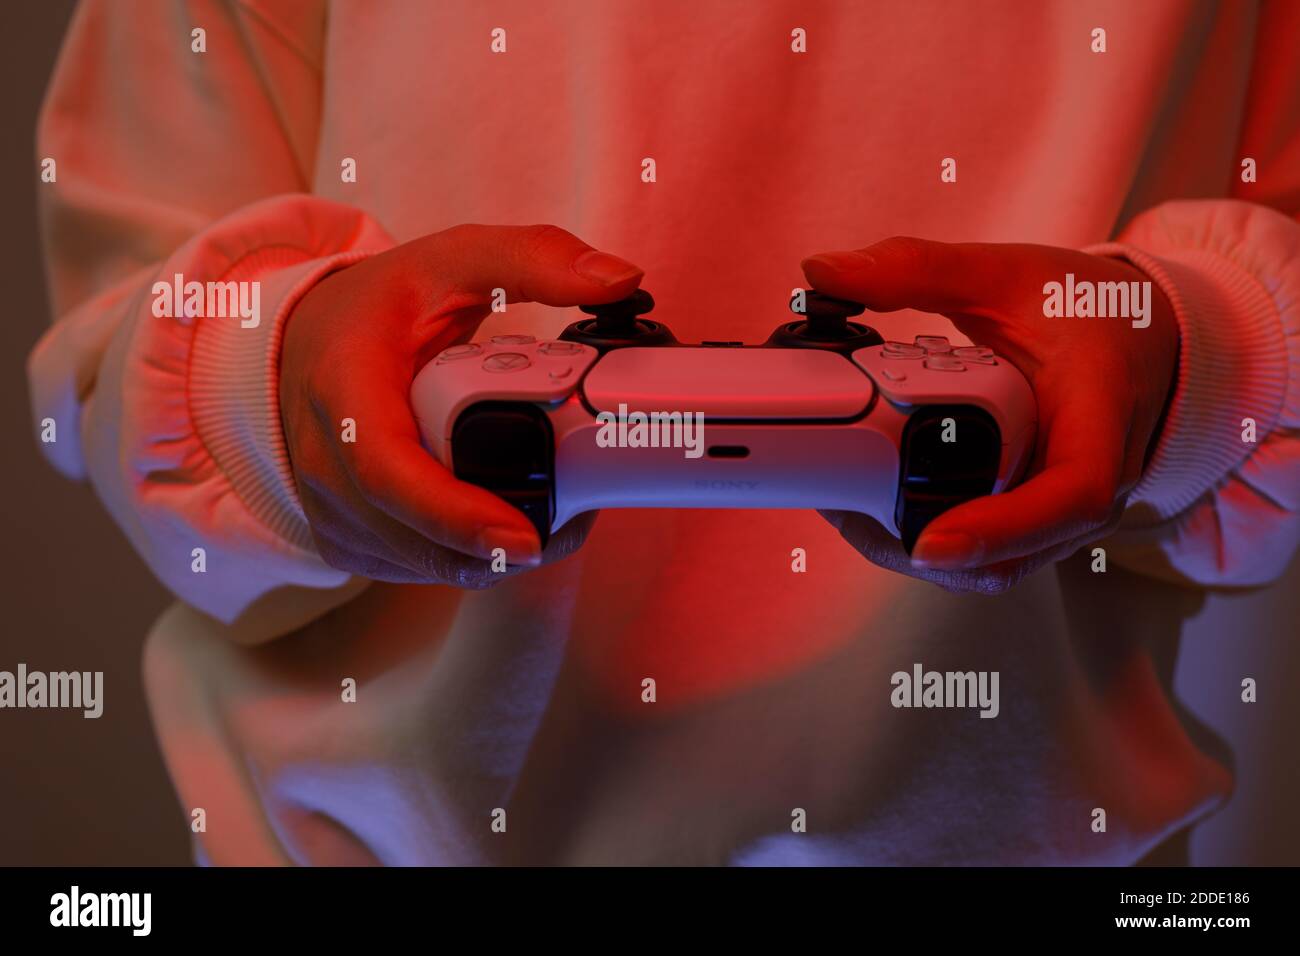 PlayStation 5 Sony reveals PS5 console and games. Dualsense controller. Woman holding joystick Stock Photo